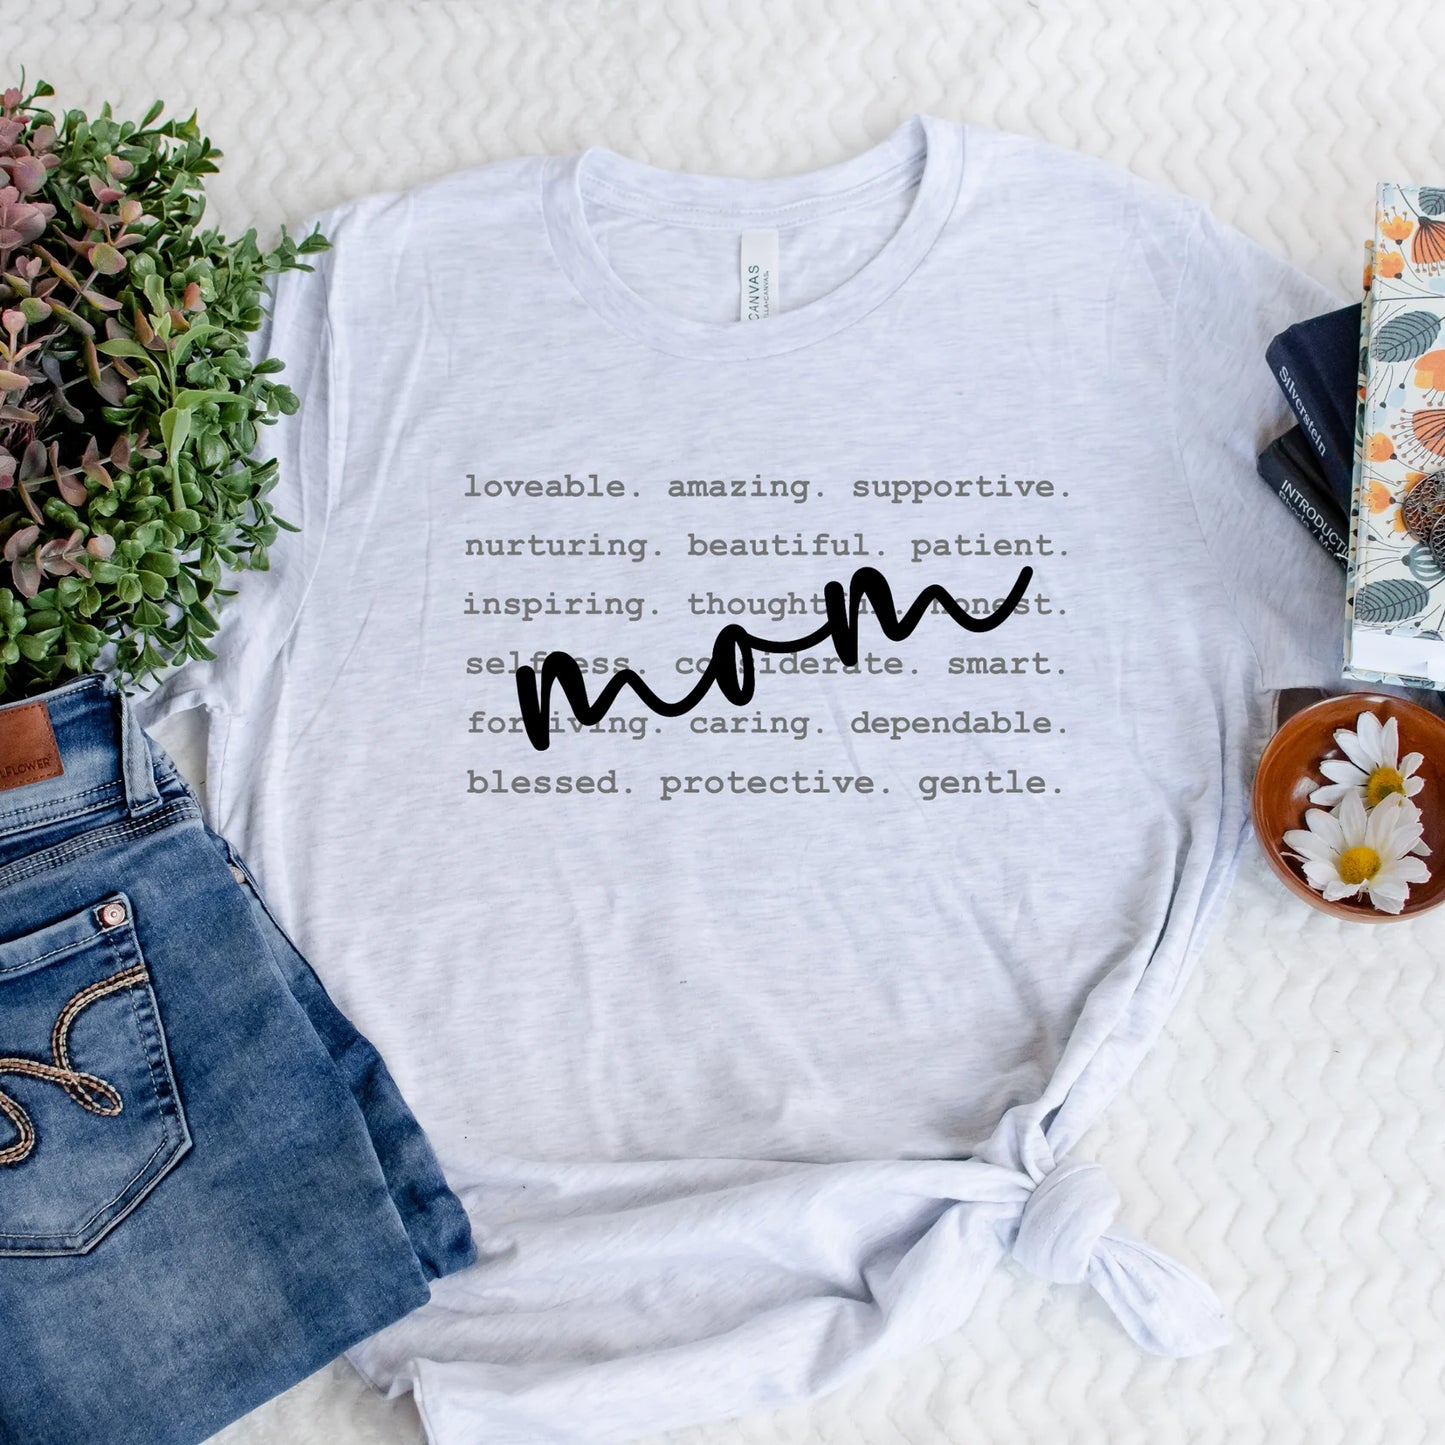 Mom Typography Graphic Tee - 3 colors